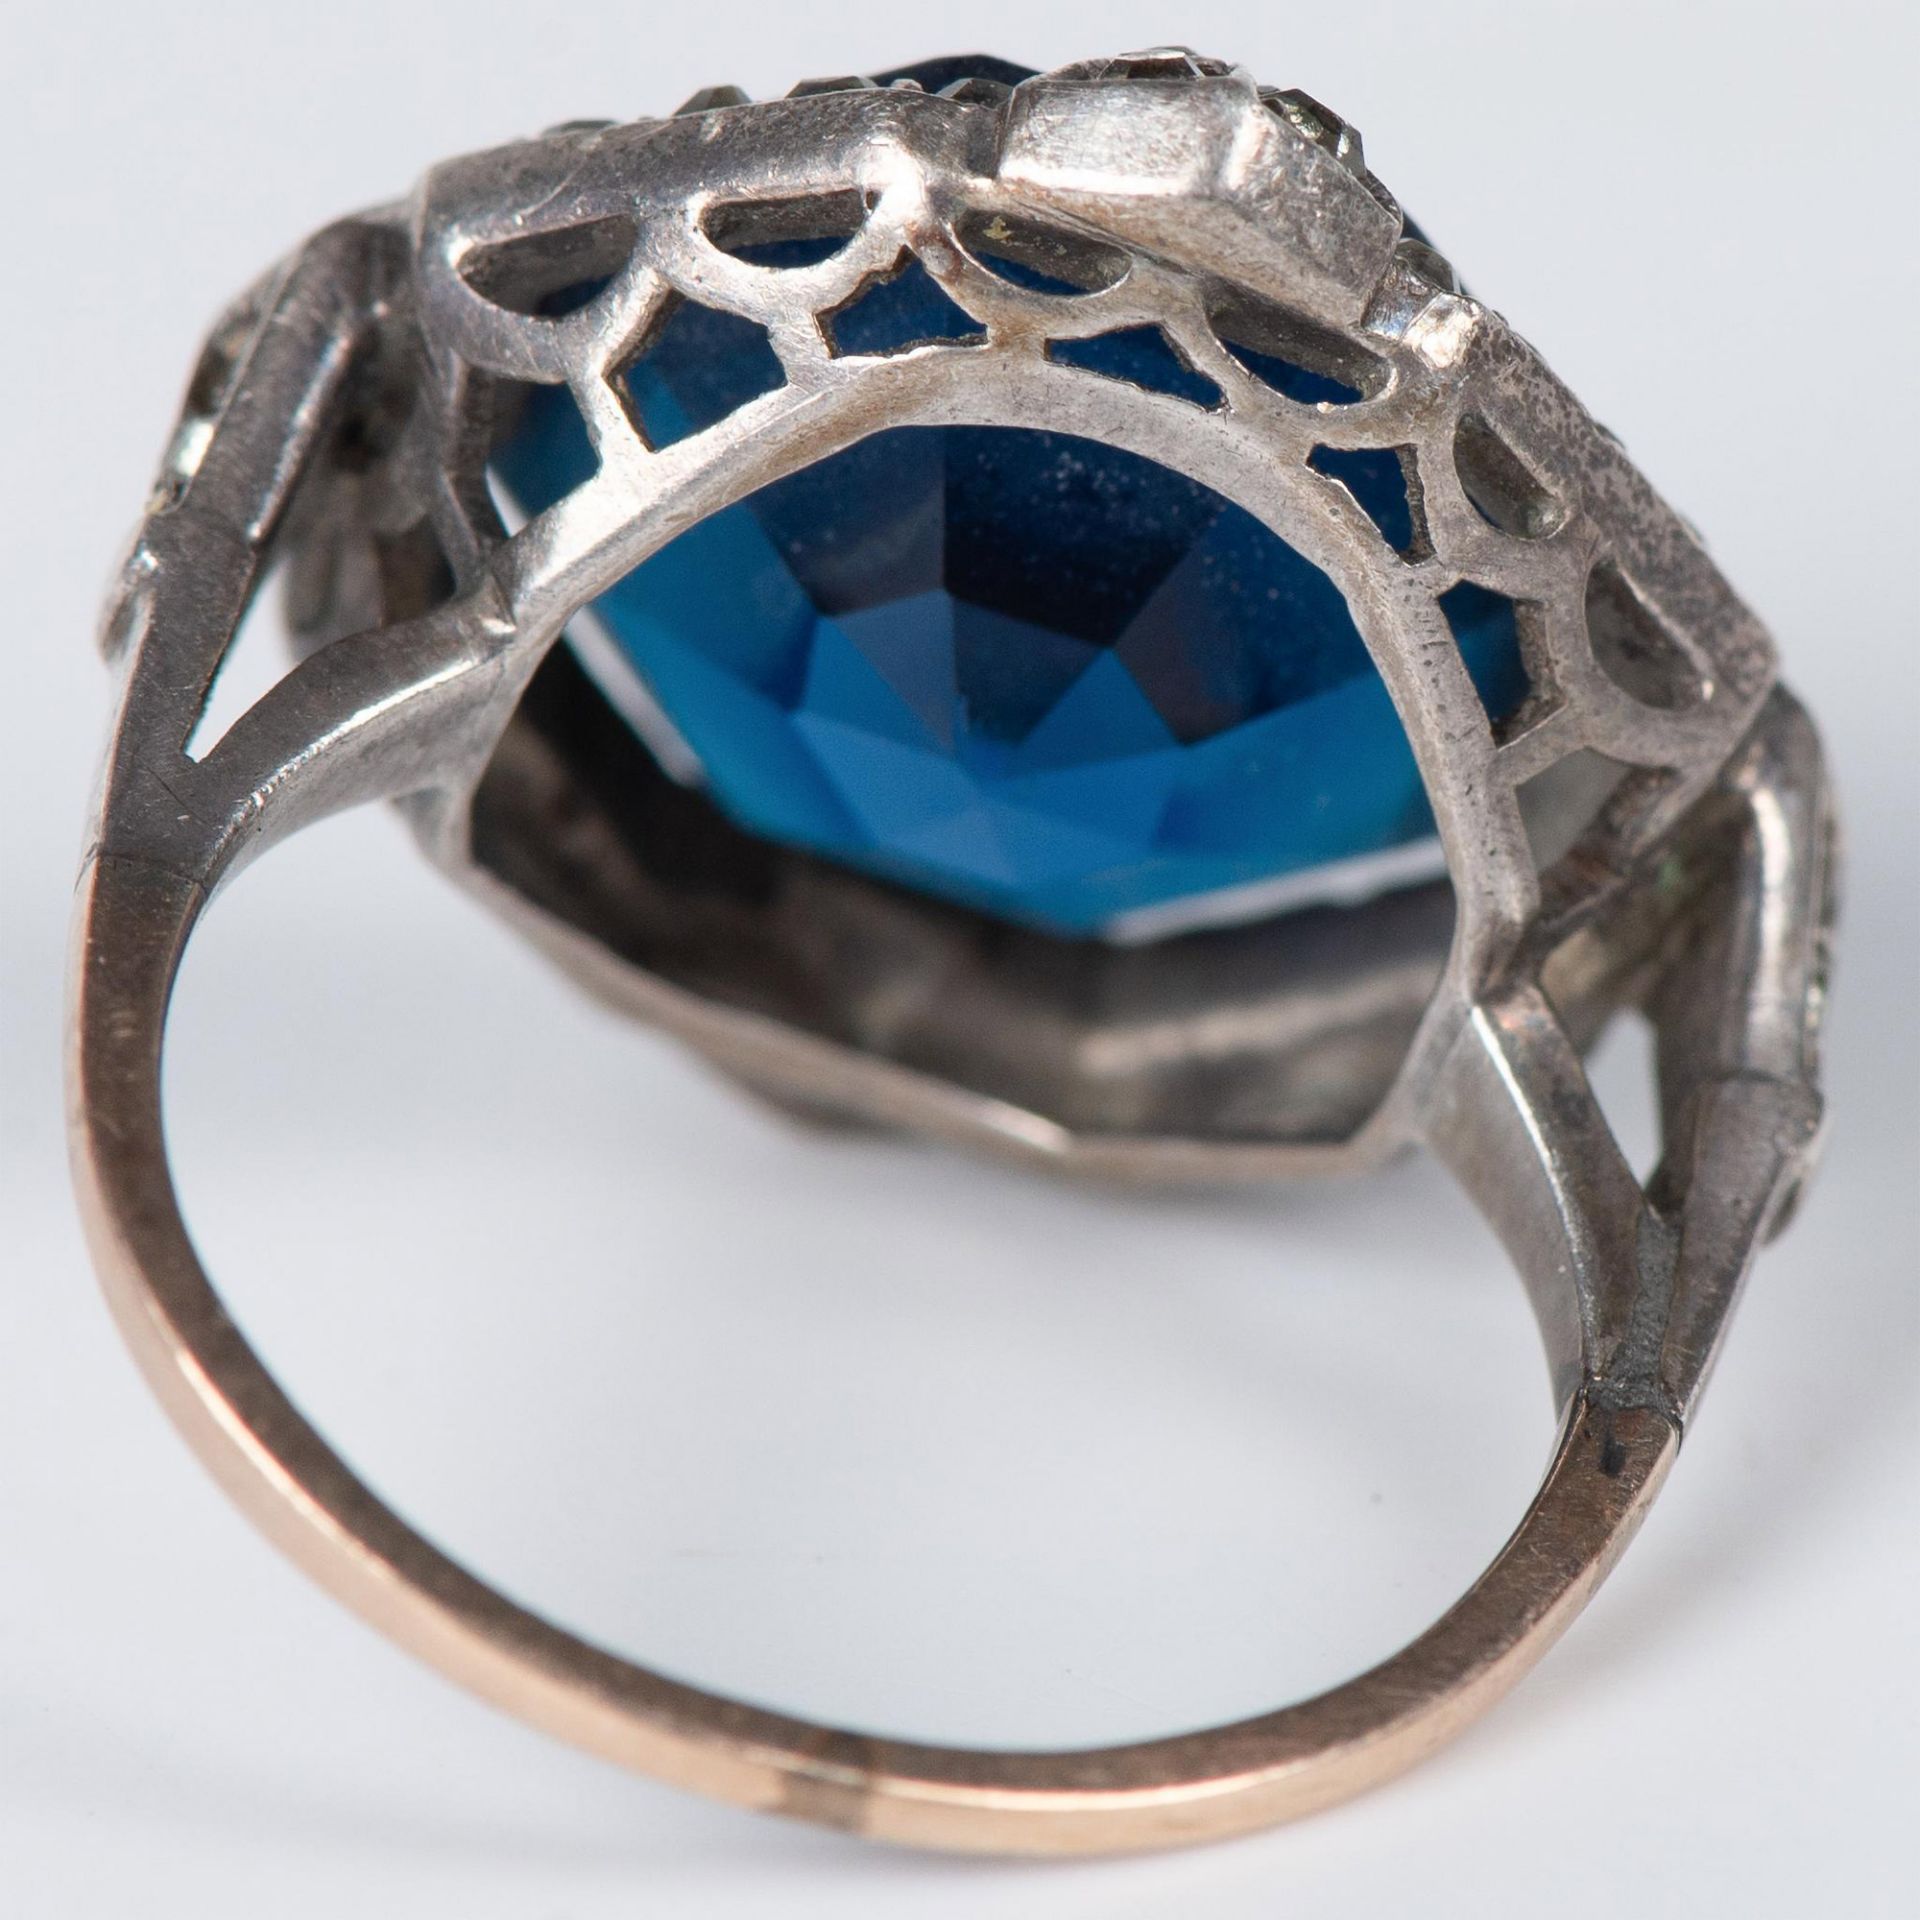 Impressive Gold, Diamonds and Synthetic Sapphire Ring - Image 5 of 6